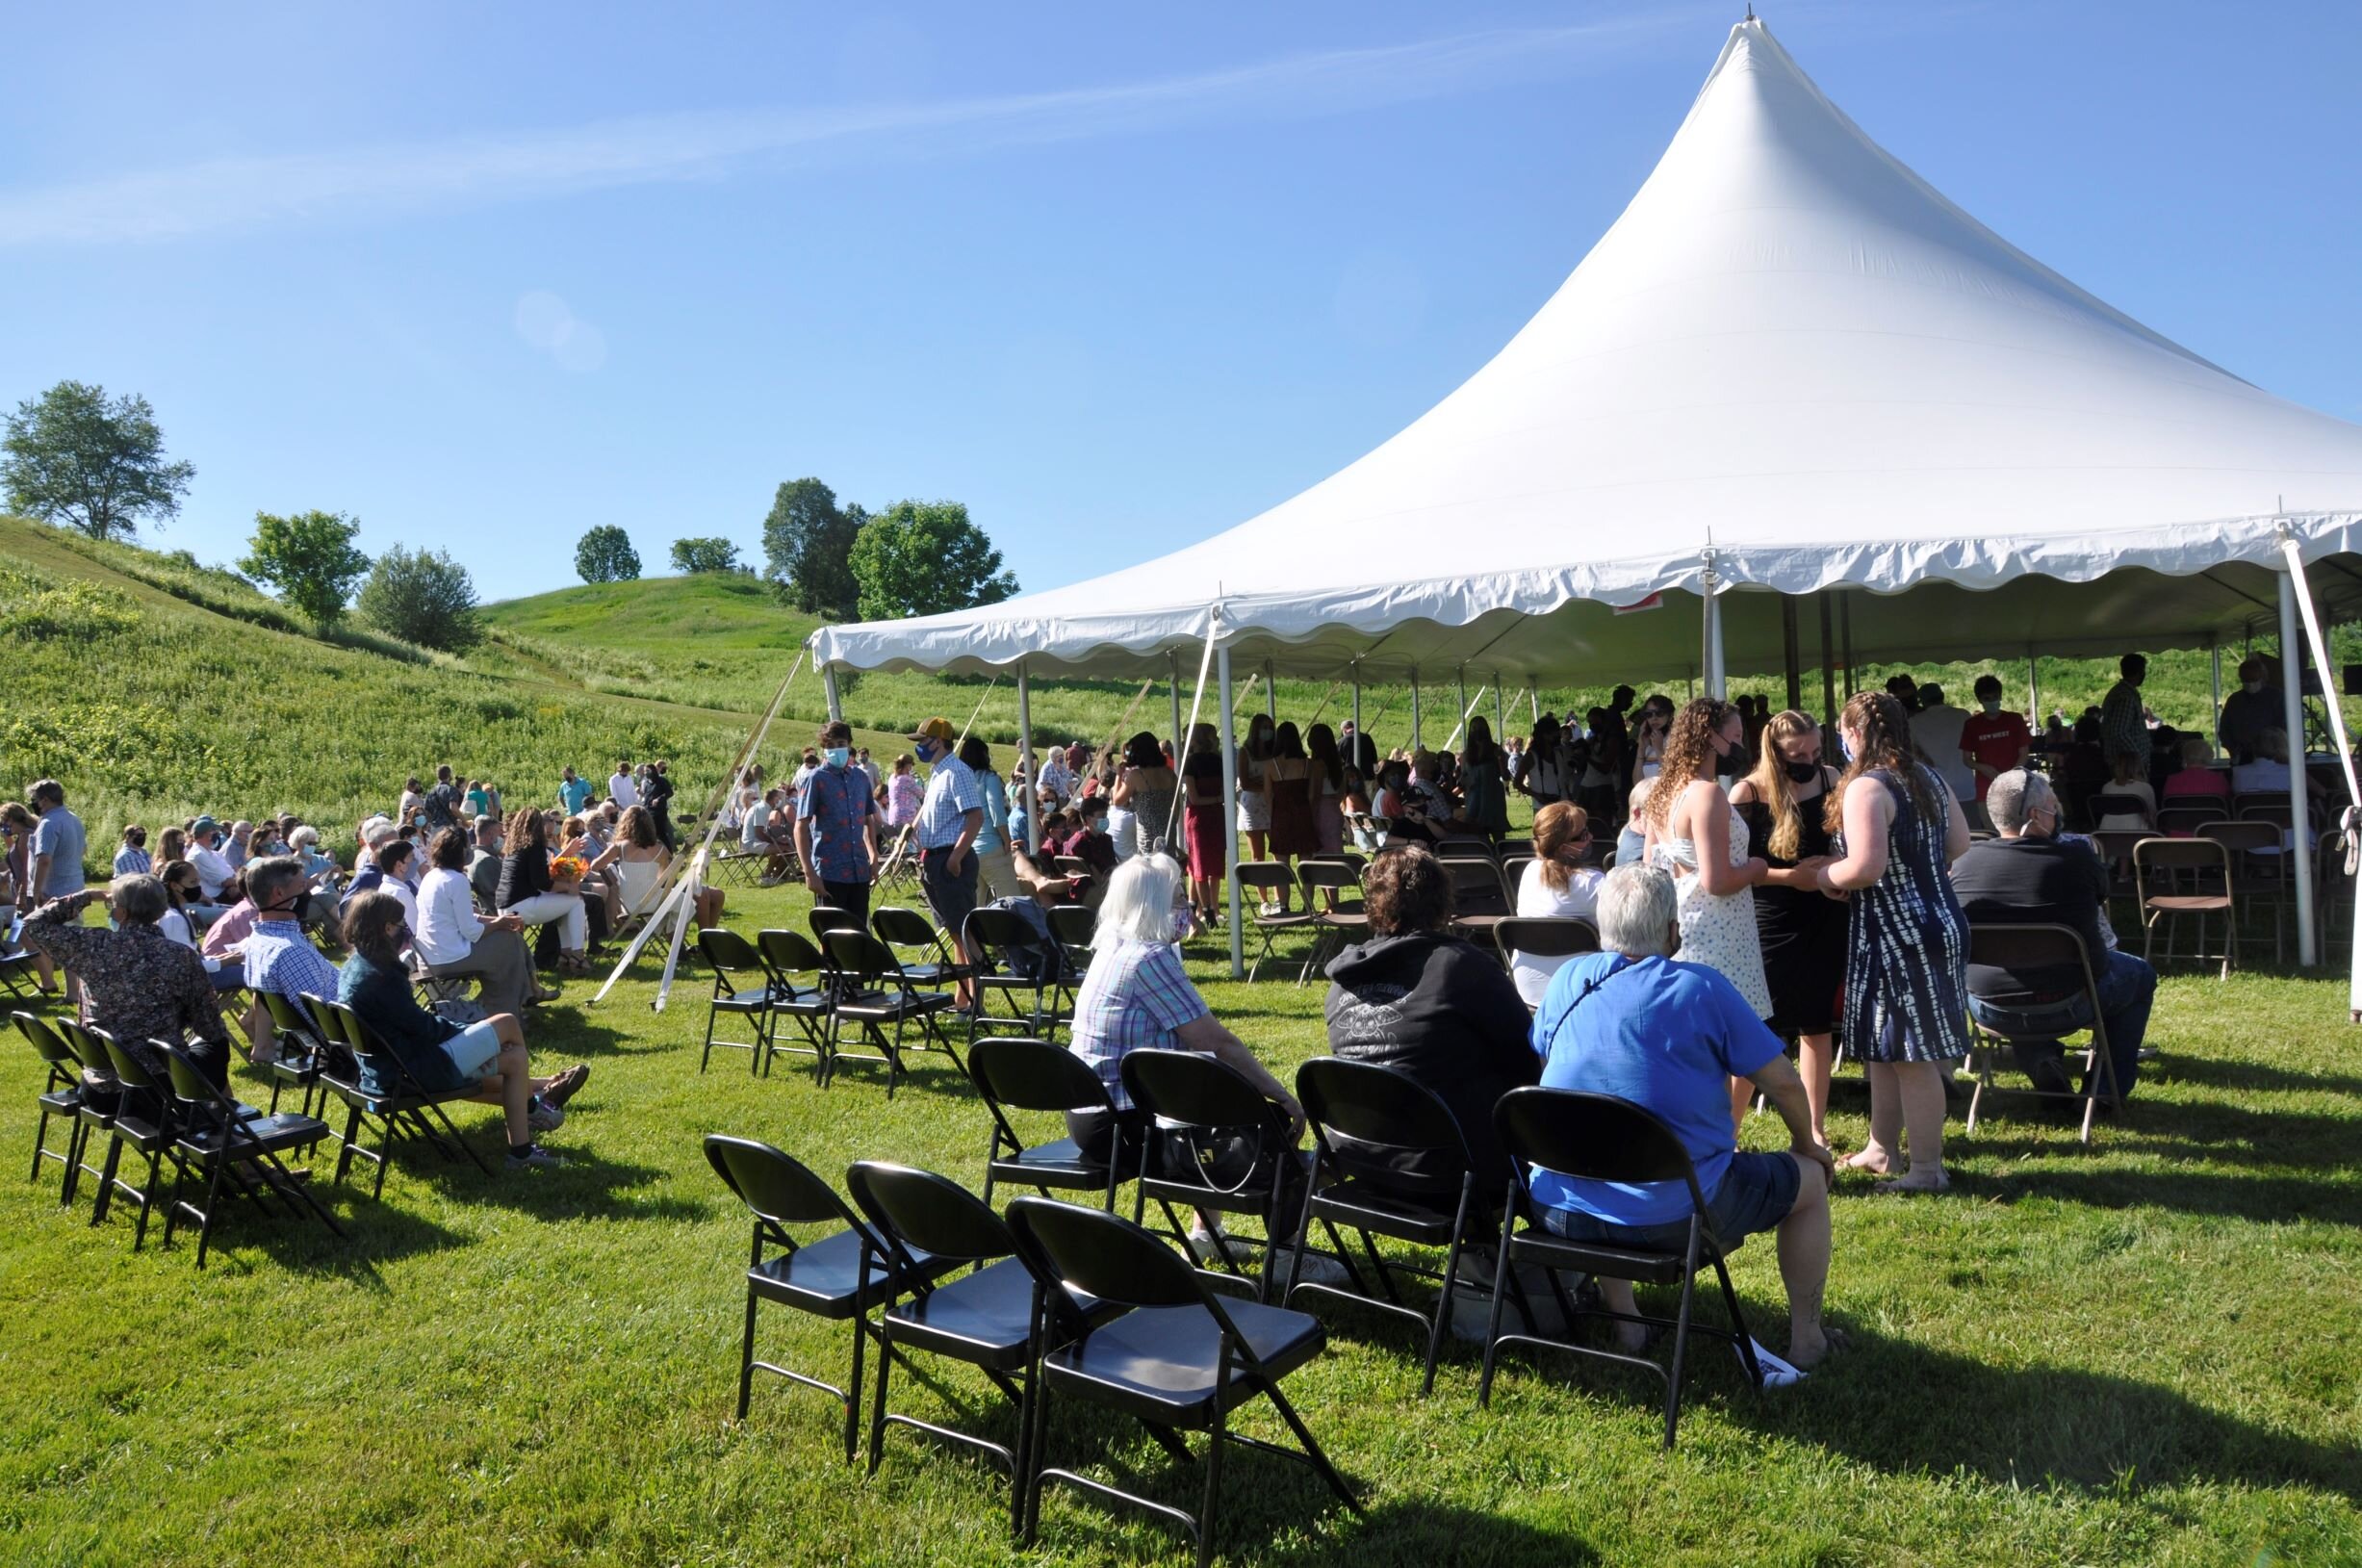   Sunshine and blue skies greet the 8th grade class and their families for Crossett Brook Middle School's first outdoor graduation on June 10. Photo by Lisa Scagliotti.  